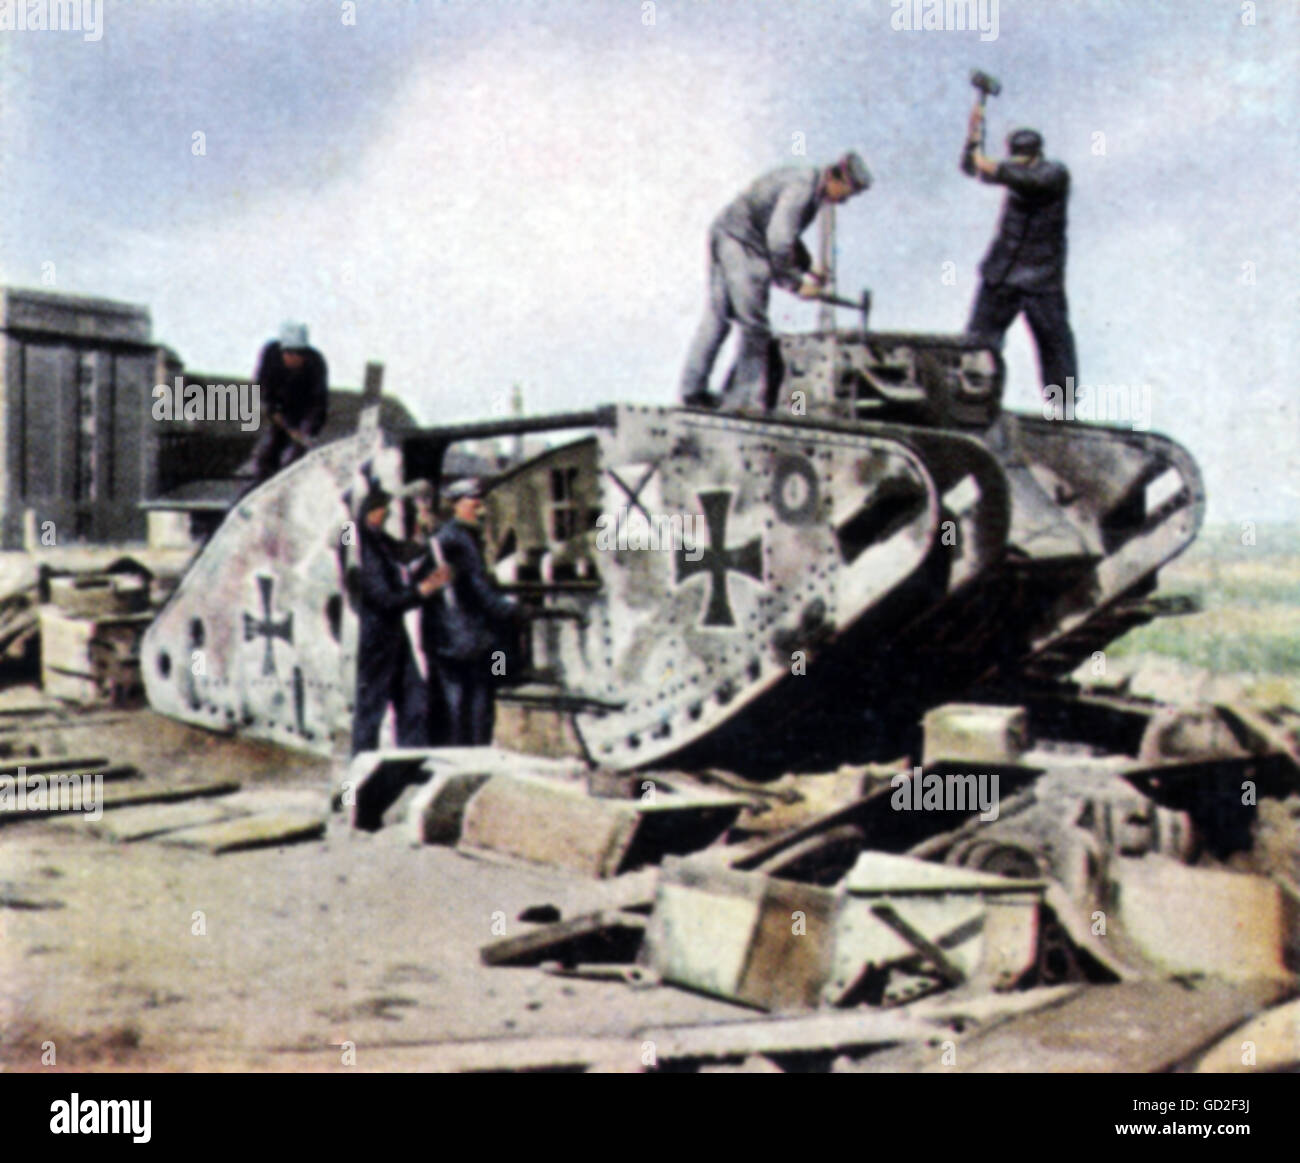 politics, demobilization of the German Army according to articles of the Versailles Treaty, demounting a tank of British design, 1920, coloured photograph, cigarette card, series 'Die Nachkriegszeit', 1935, Additional-Rights-Clearences-Not Available Stock Photo